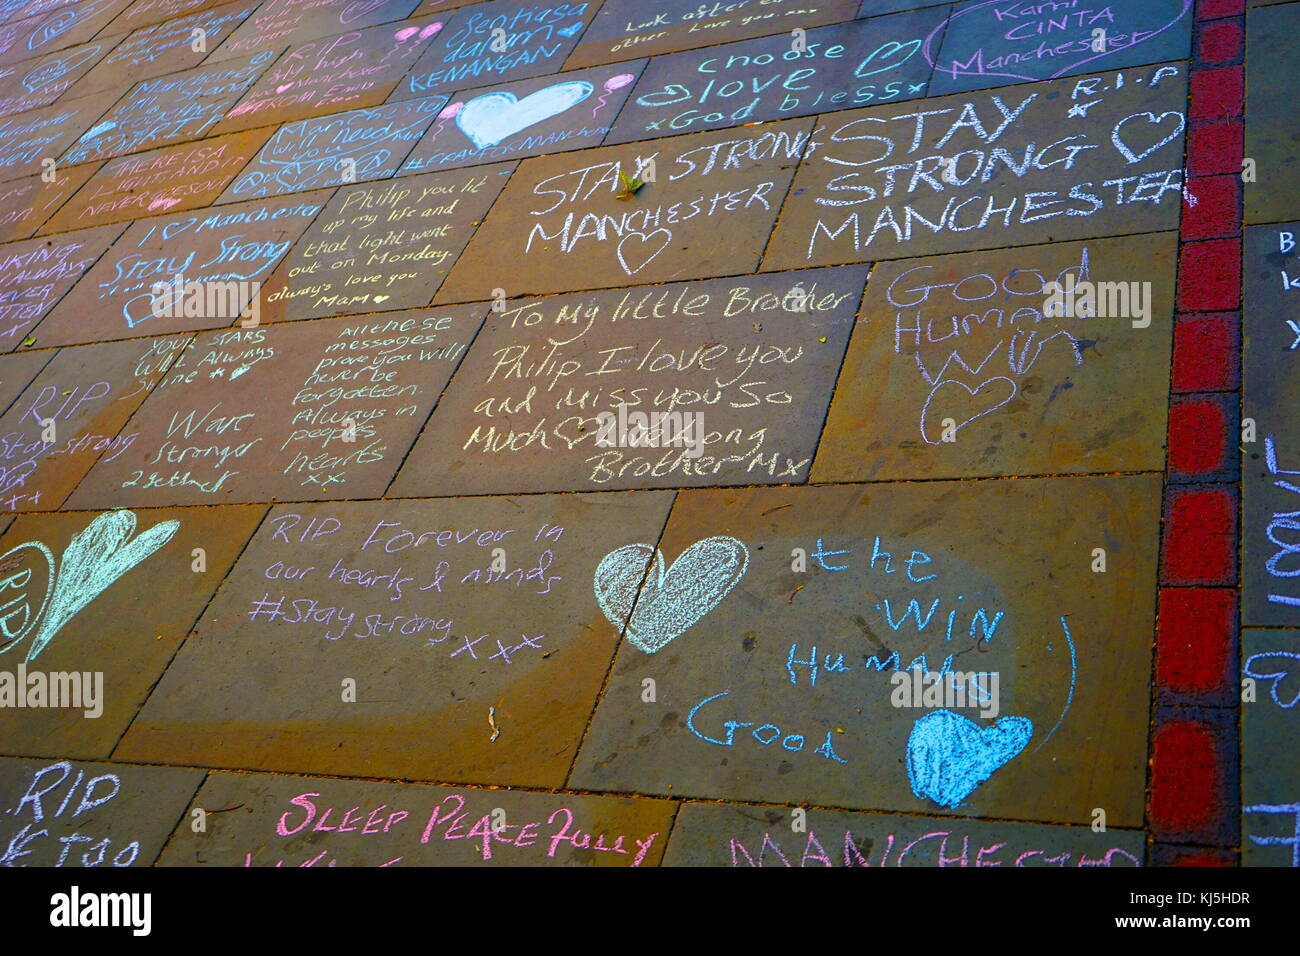 Tributes written on the ground, during the days following the 22 May 2017, suicide bombing, carried out at Manchester Arena in Manchester, England, following a concert by American singer Ariana Grande. Stock Photo